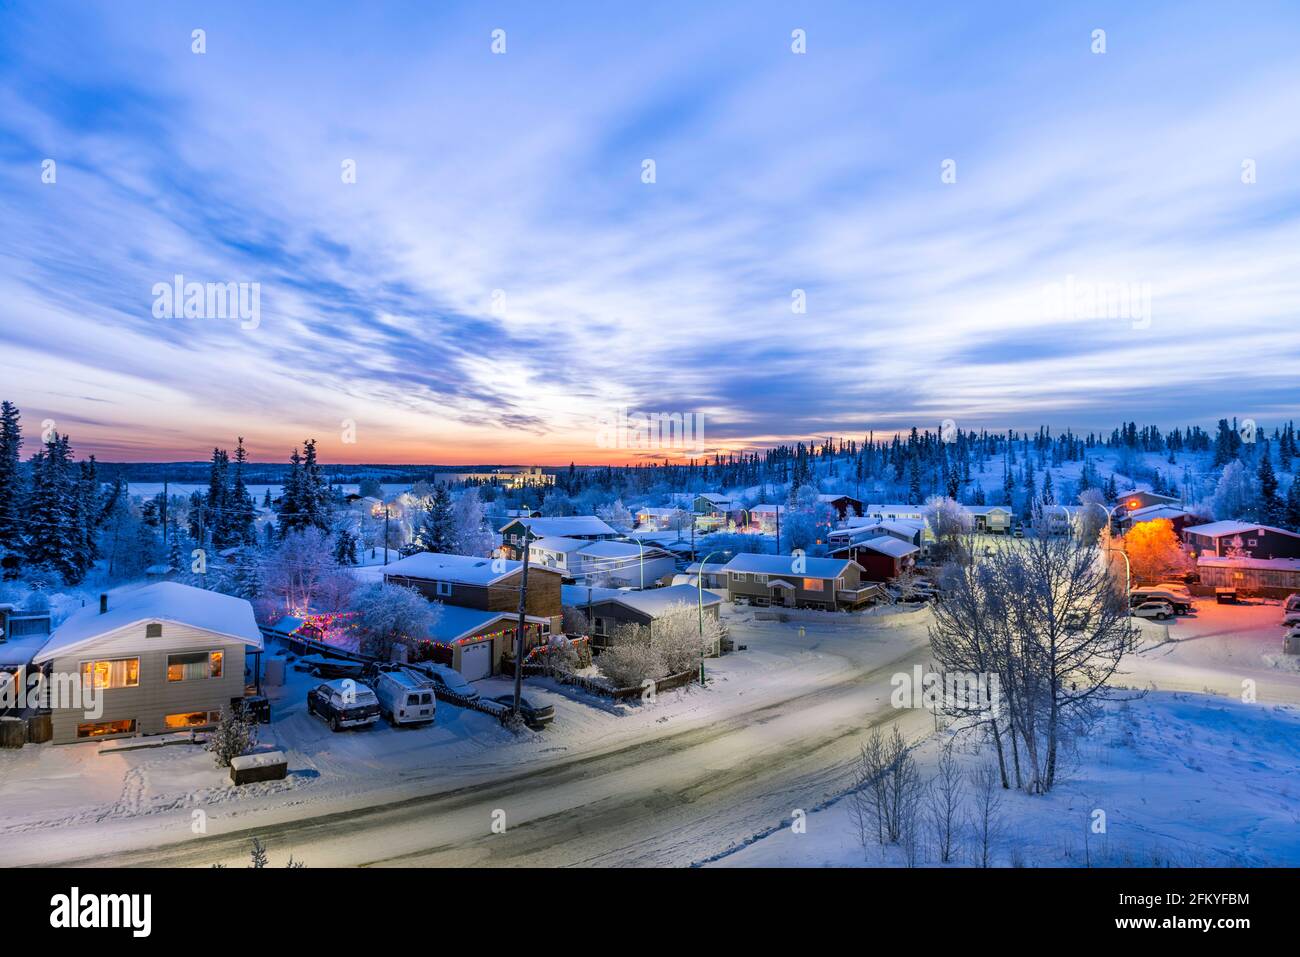 Yellowknife northwest territories canada 2 January 2021: Sunrise over looking houses in yellowknife with clouds Stock Photo